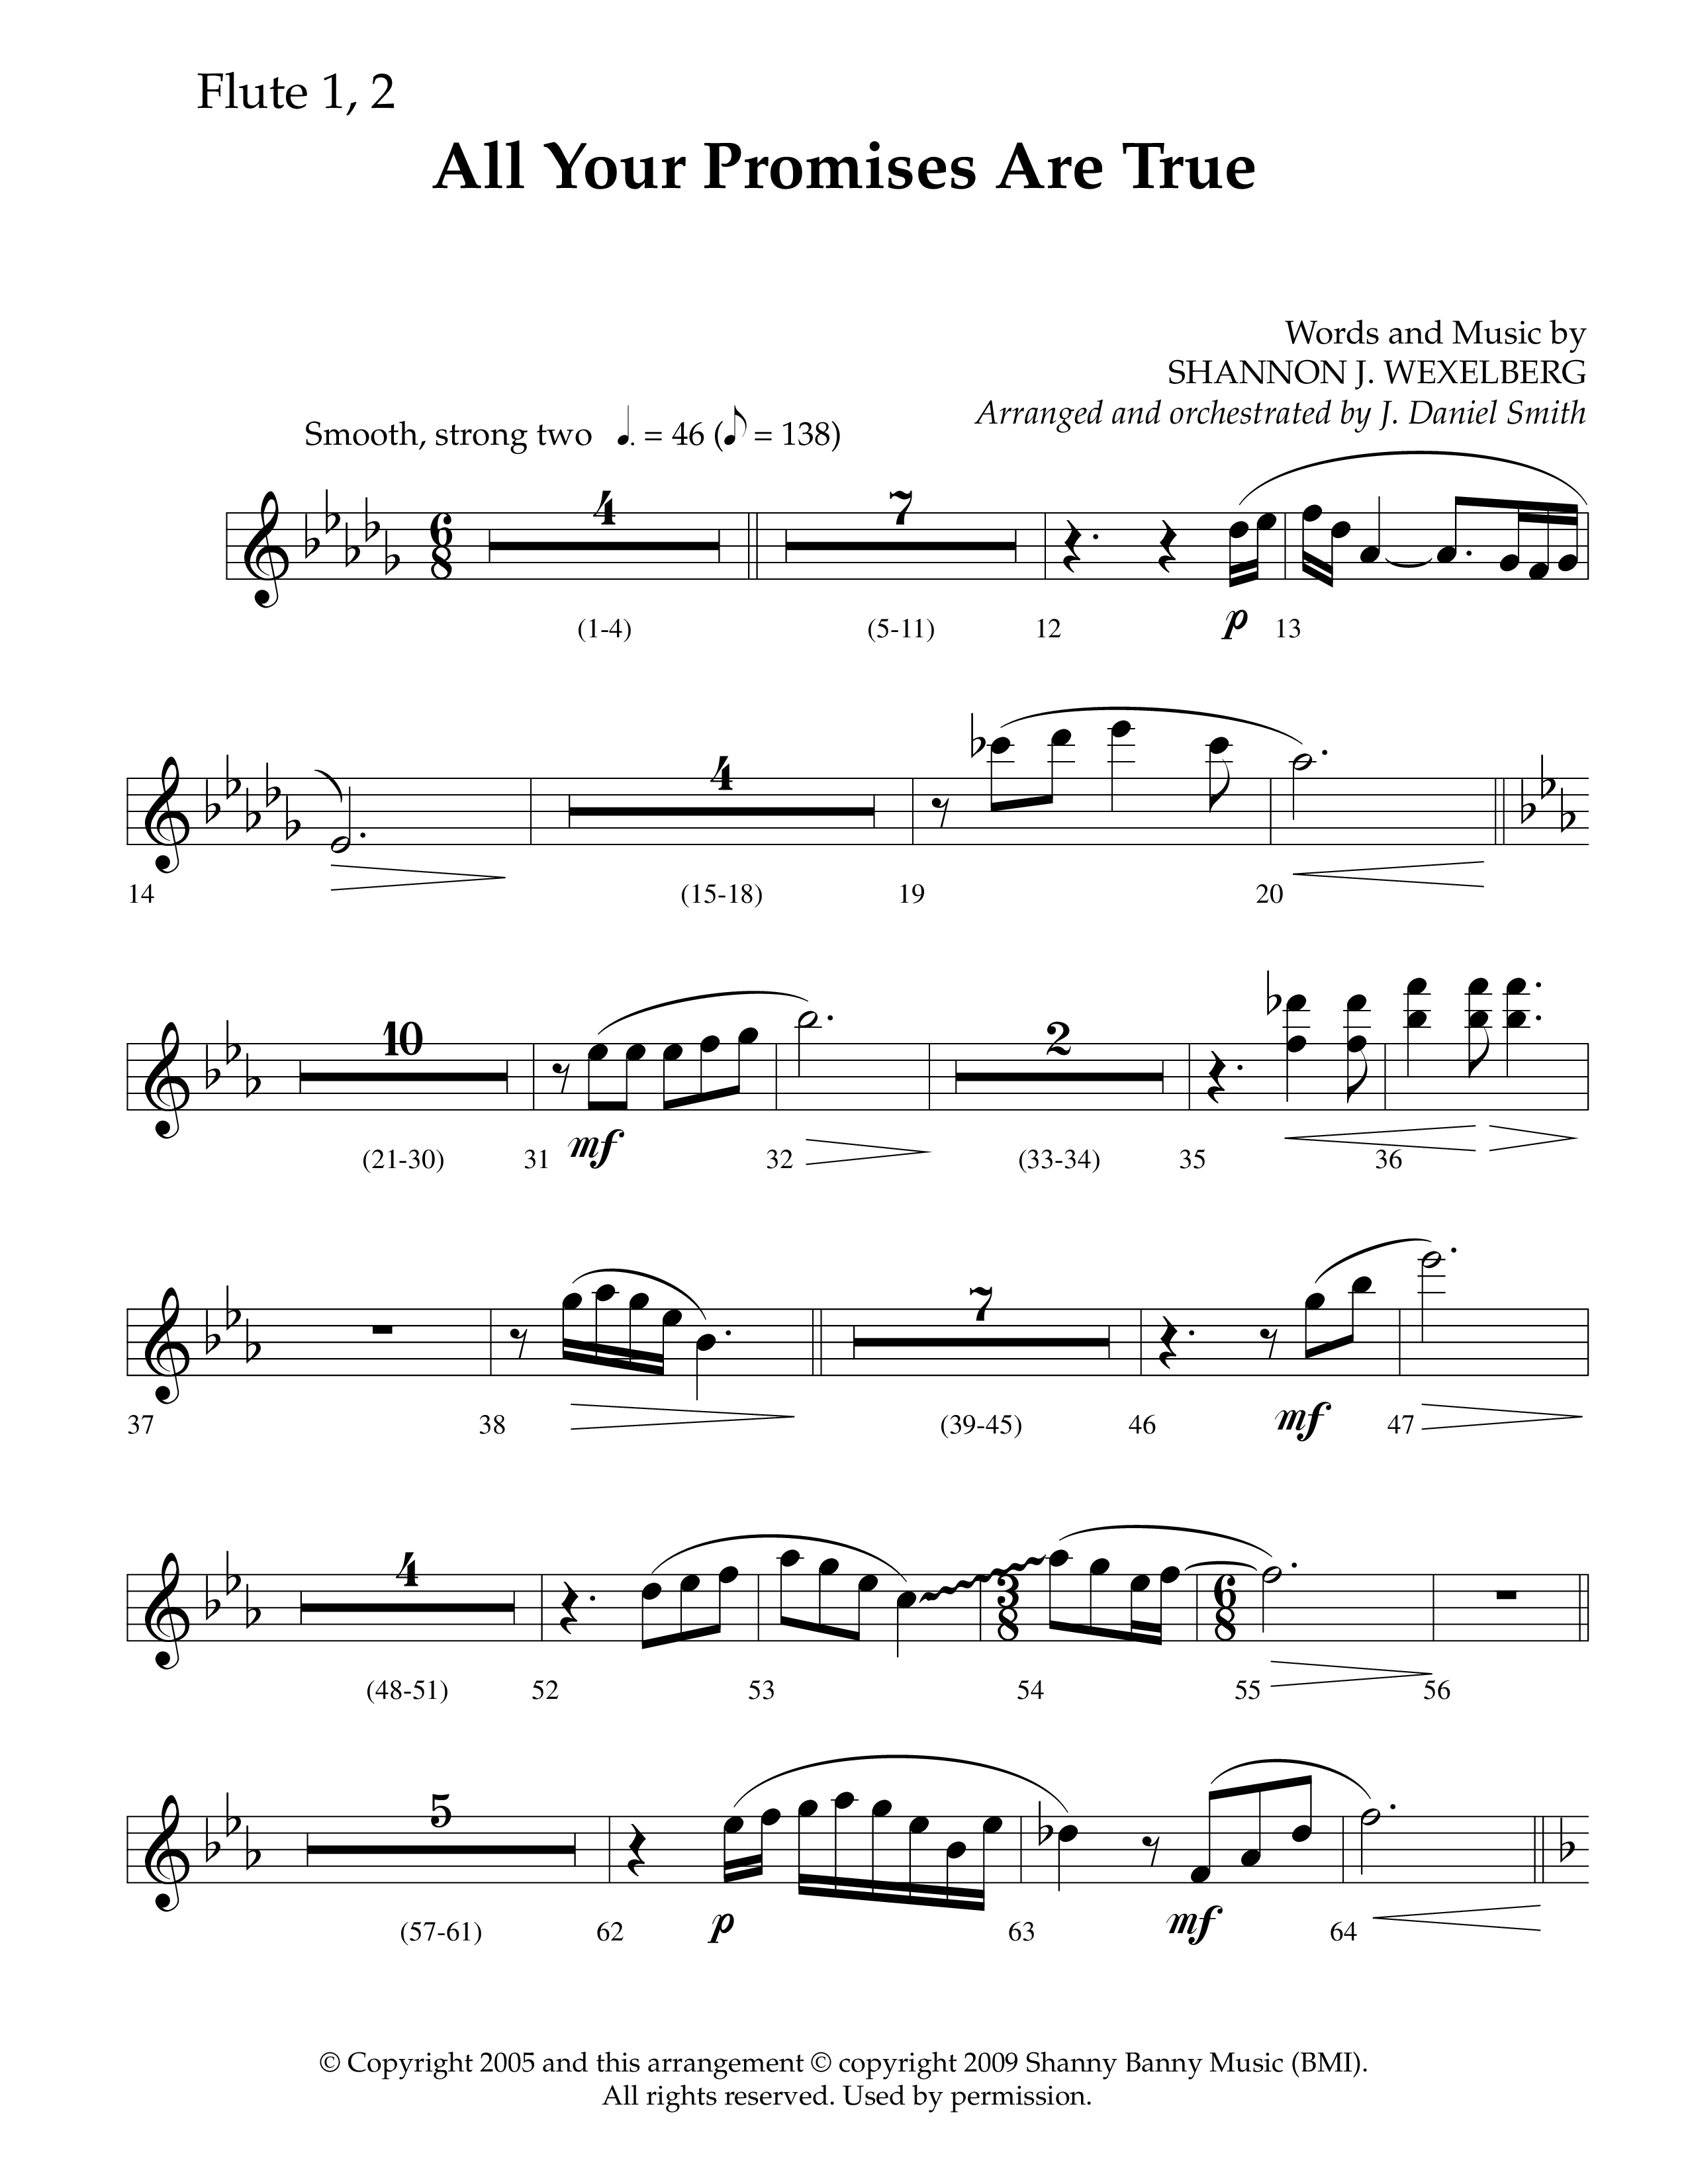 All Your Promises Are True (Choral Anthem SATB) Flute 1/2 (Lifeway Choral / Arr. J. Daniel Smith)